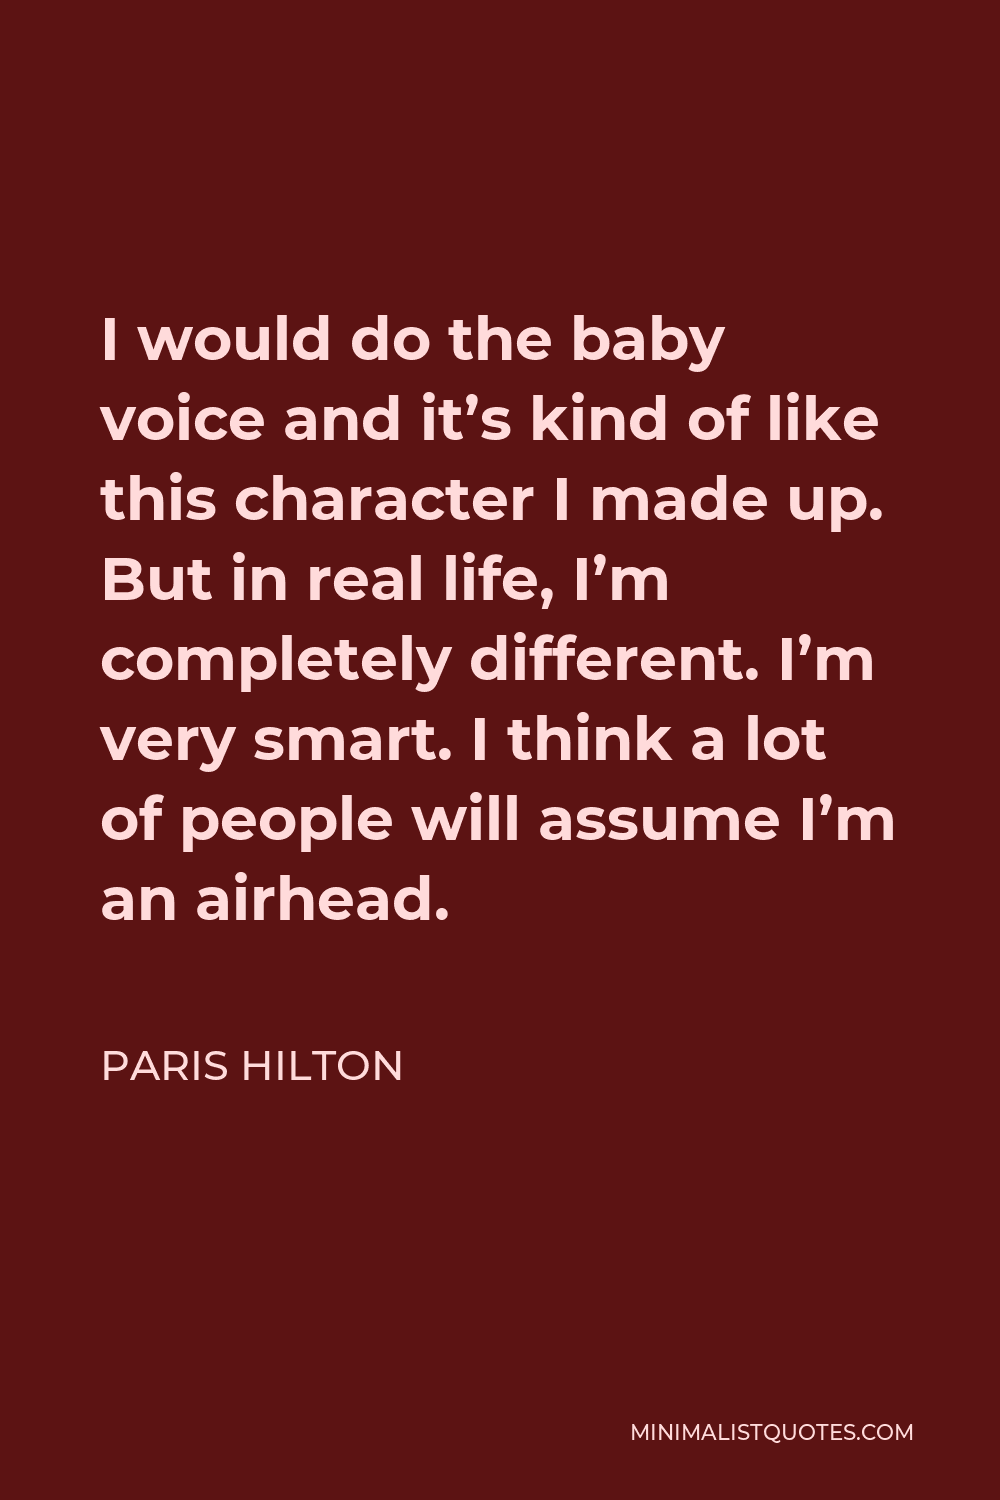 Paris Hilton Quote - I would do the baby voice and it’s kind of like this character I made up. But in real life, I’m completely different. I’m very smart. I think a lot of people will assume I’m an airhead.